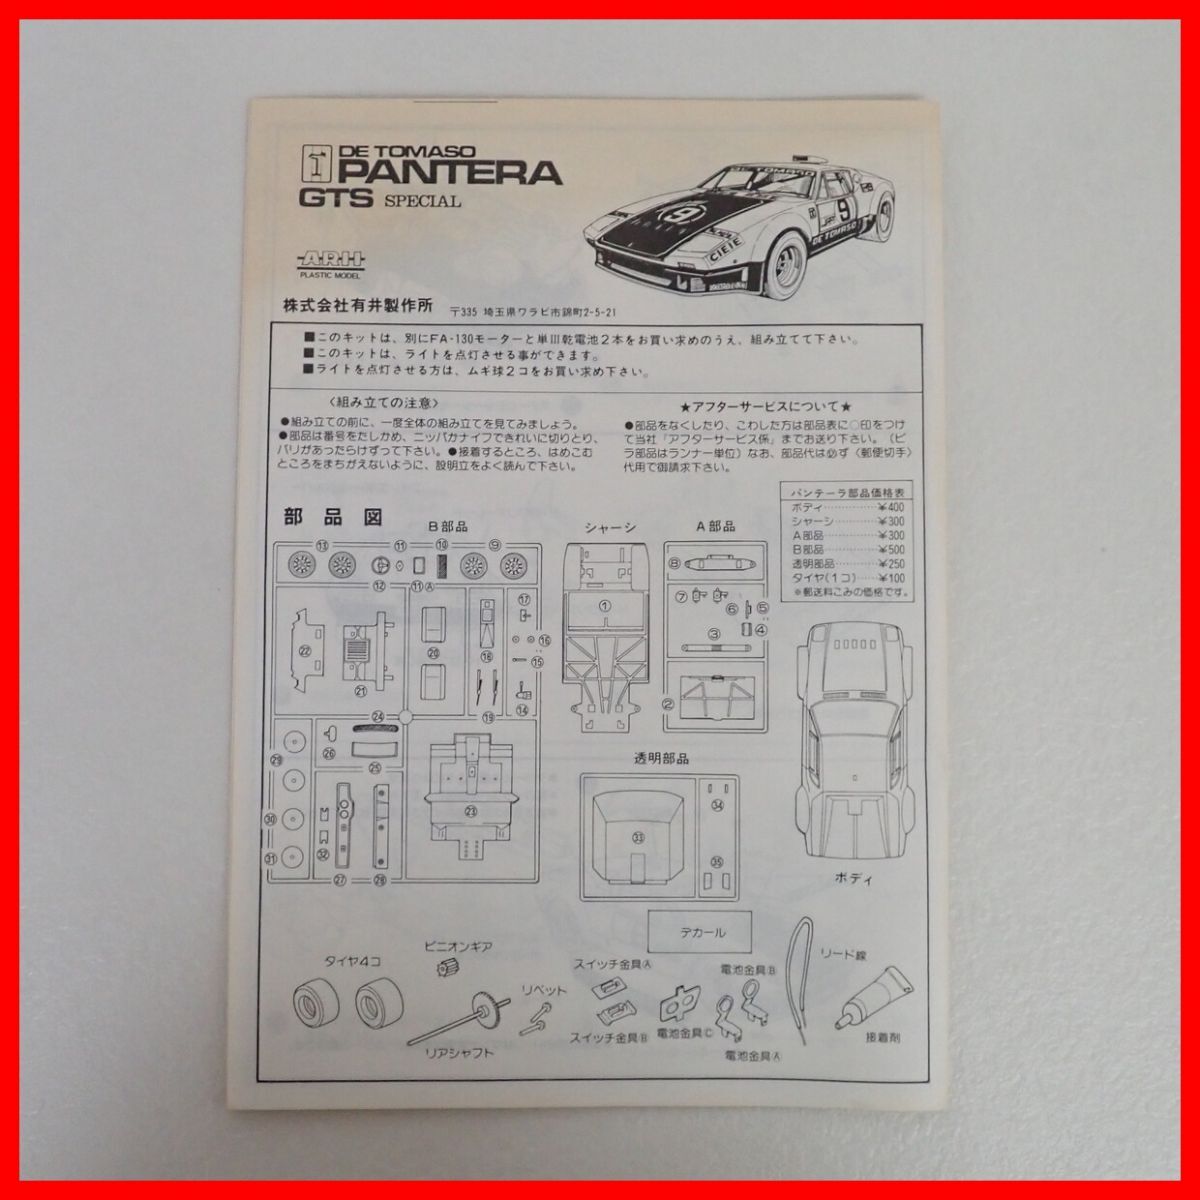 * not yet constructed * one part parts cut ... settled have i1/24te* Tomaso bread te-laGTS KIT No.AR-903-700 DE TOMASO PANTERA GTS plastic model ARII[20